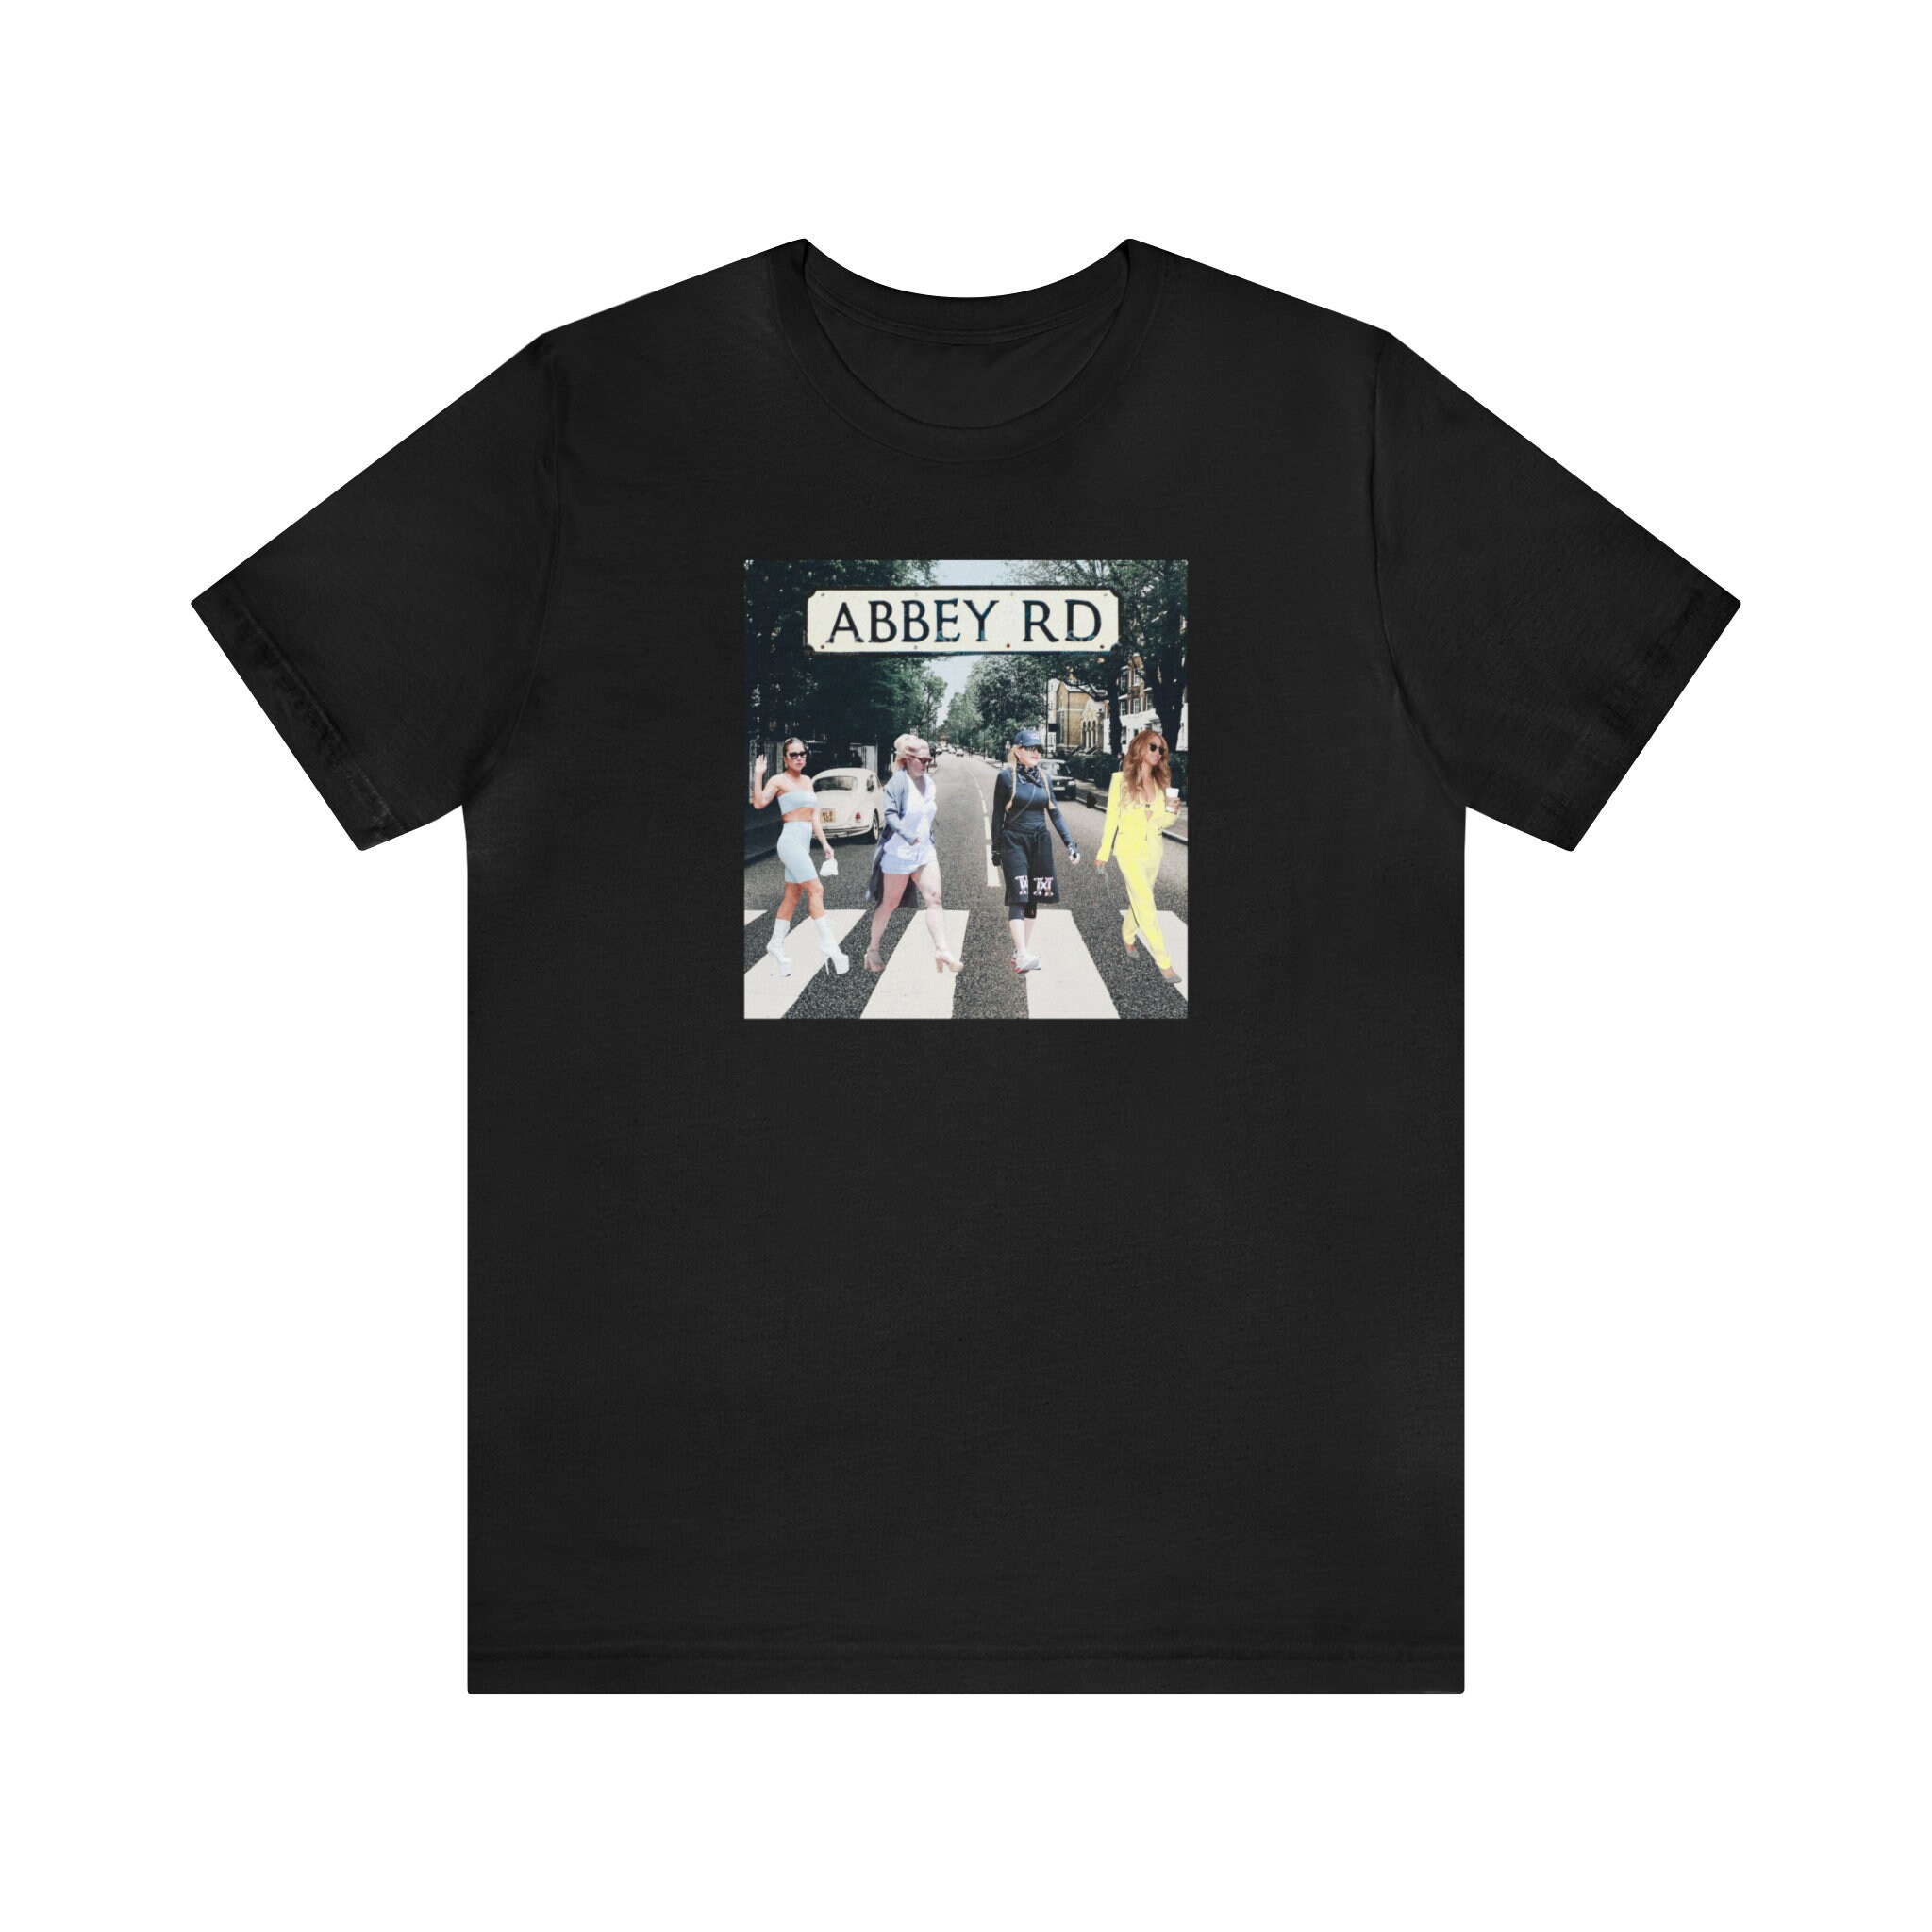 Discover Iconic Pop Divas Abbey Road T-Shirt | Ld ga, Britney Spears, Madonna, Beyonce